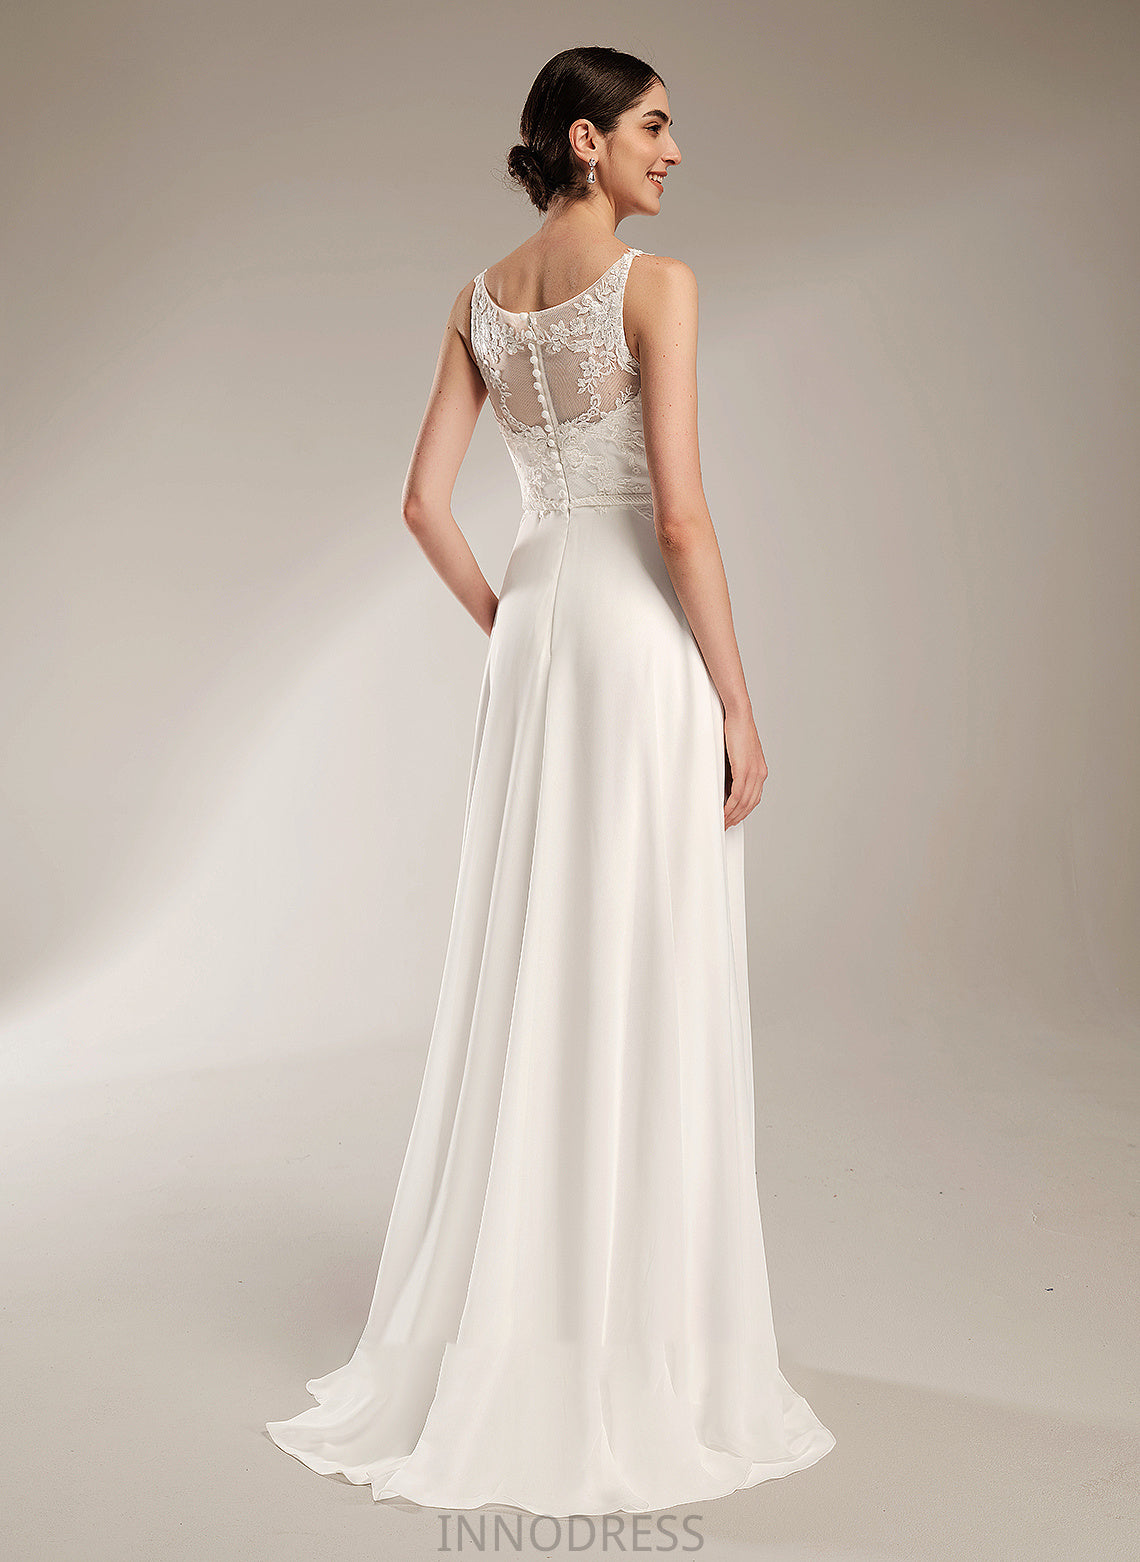 Sweep Dress Jasmine With Sequins Illusion Wedding Dresses A-Line Wedding Train Lace